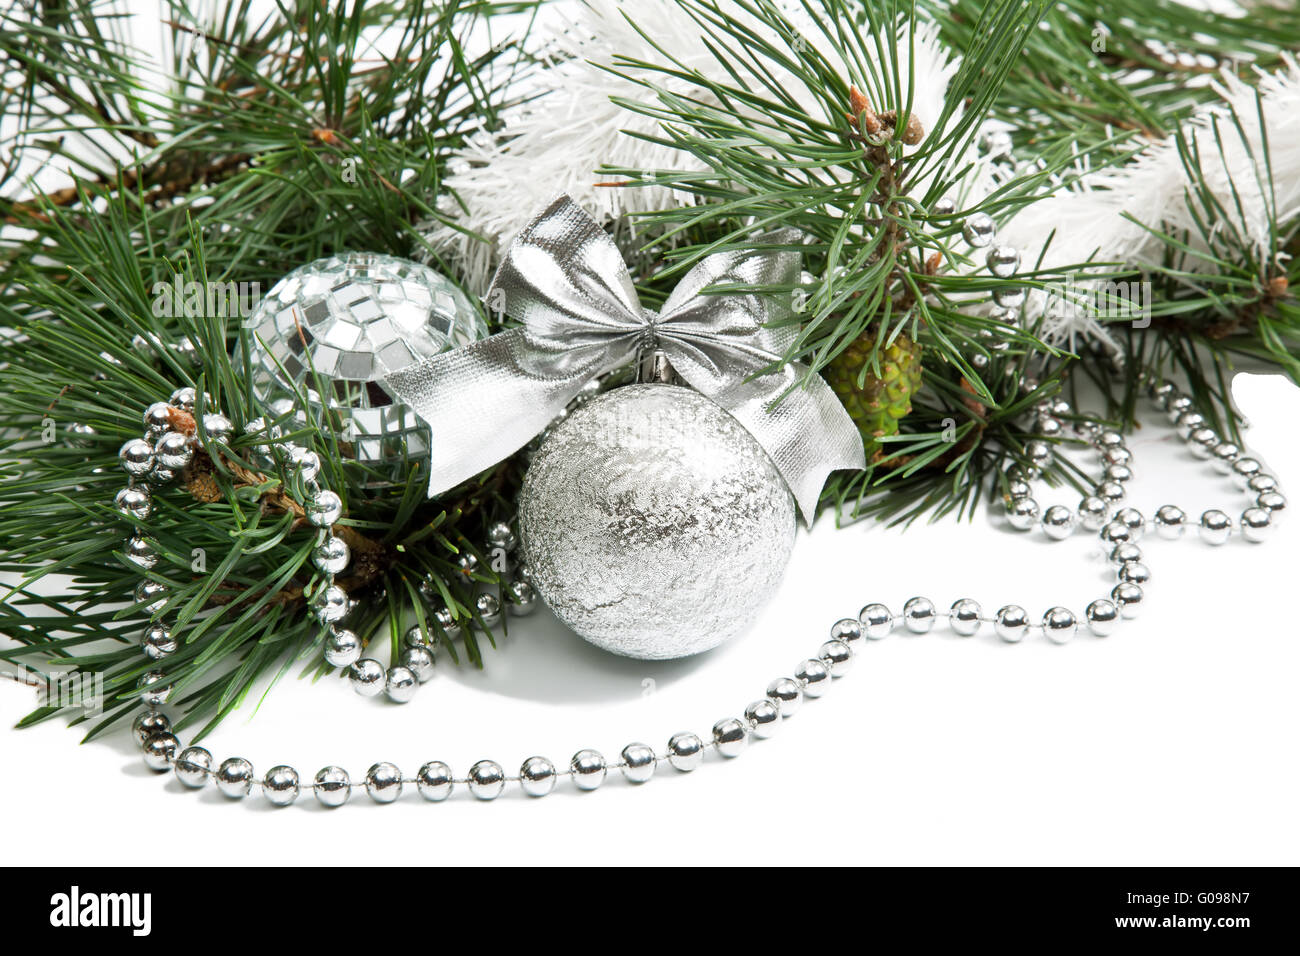 Christmas firtree branch with silver balls, beads and ribbon Stock Photo